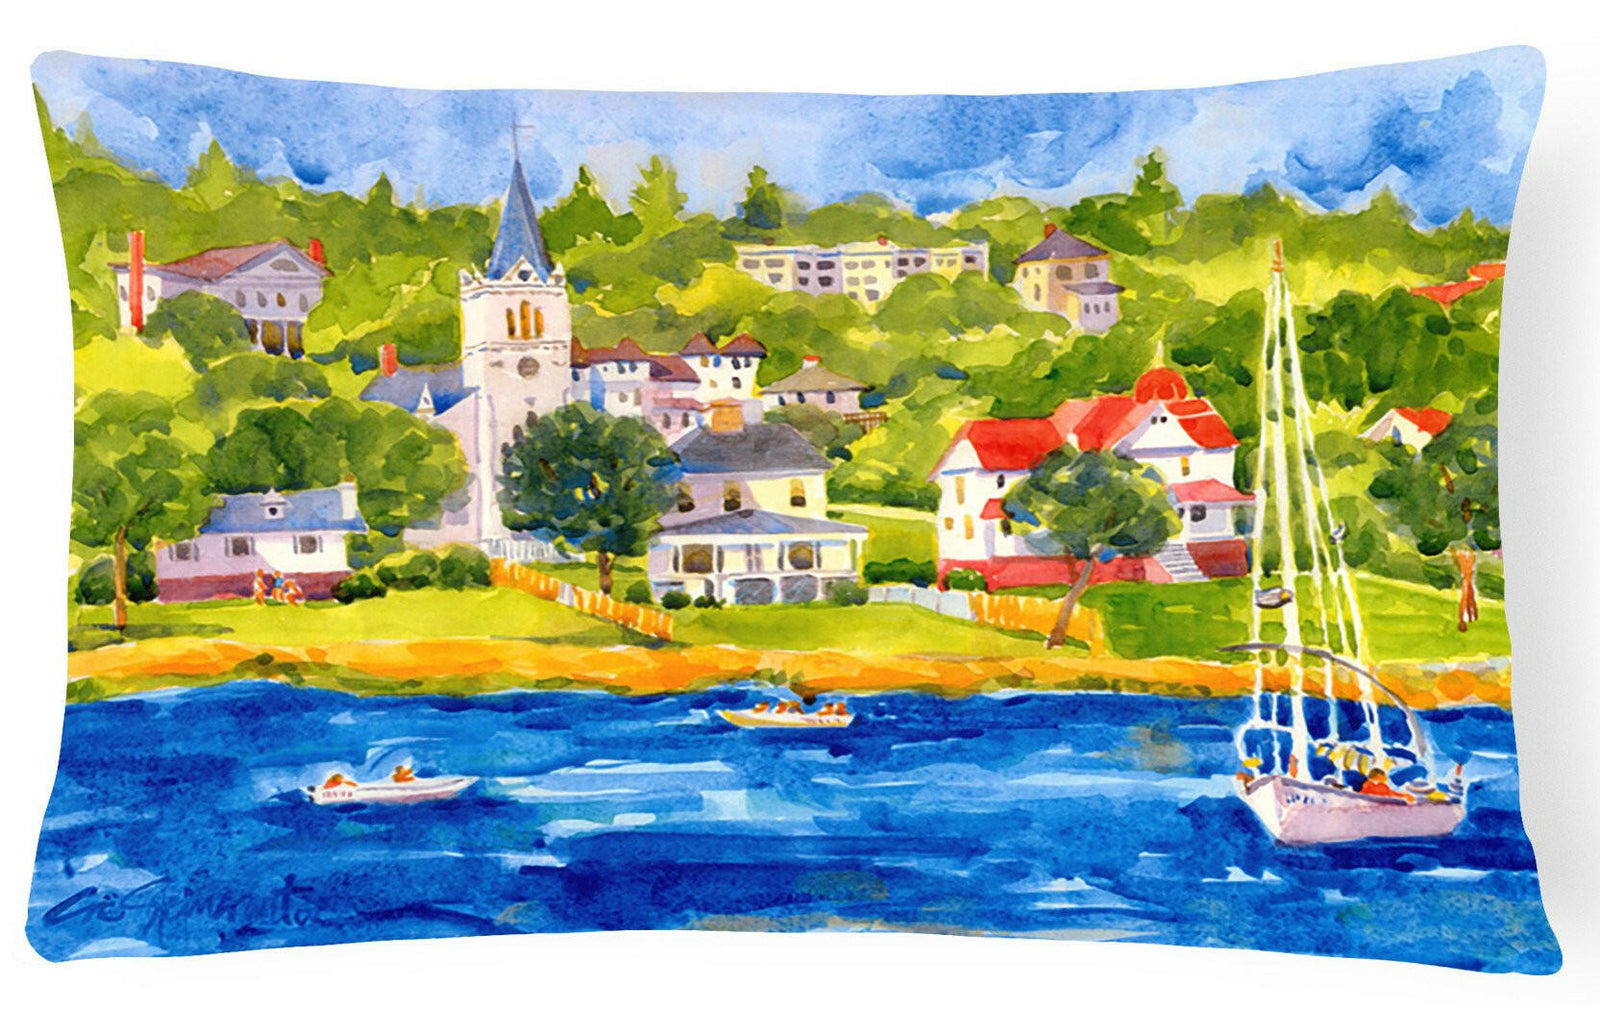 Harbour Scene with Sailboat  Decorative   Canvas Fabric Pillow by Caroline's Treasures